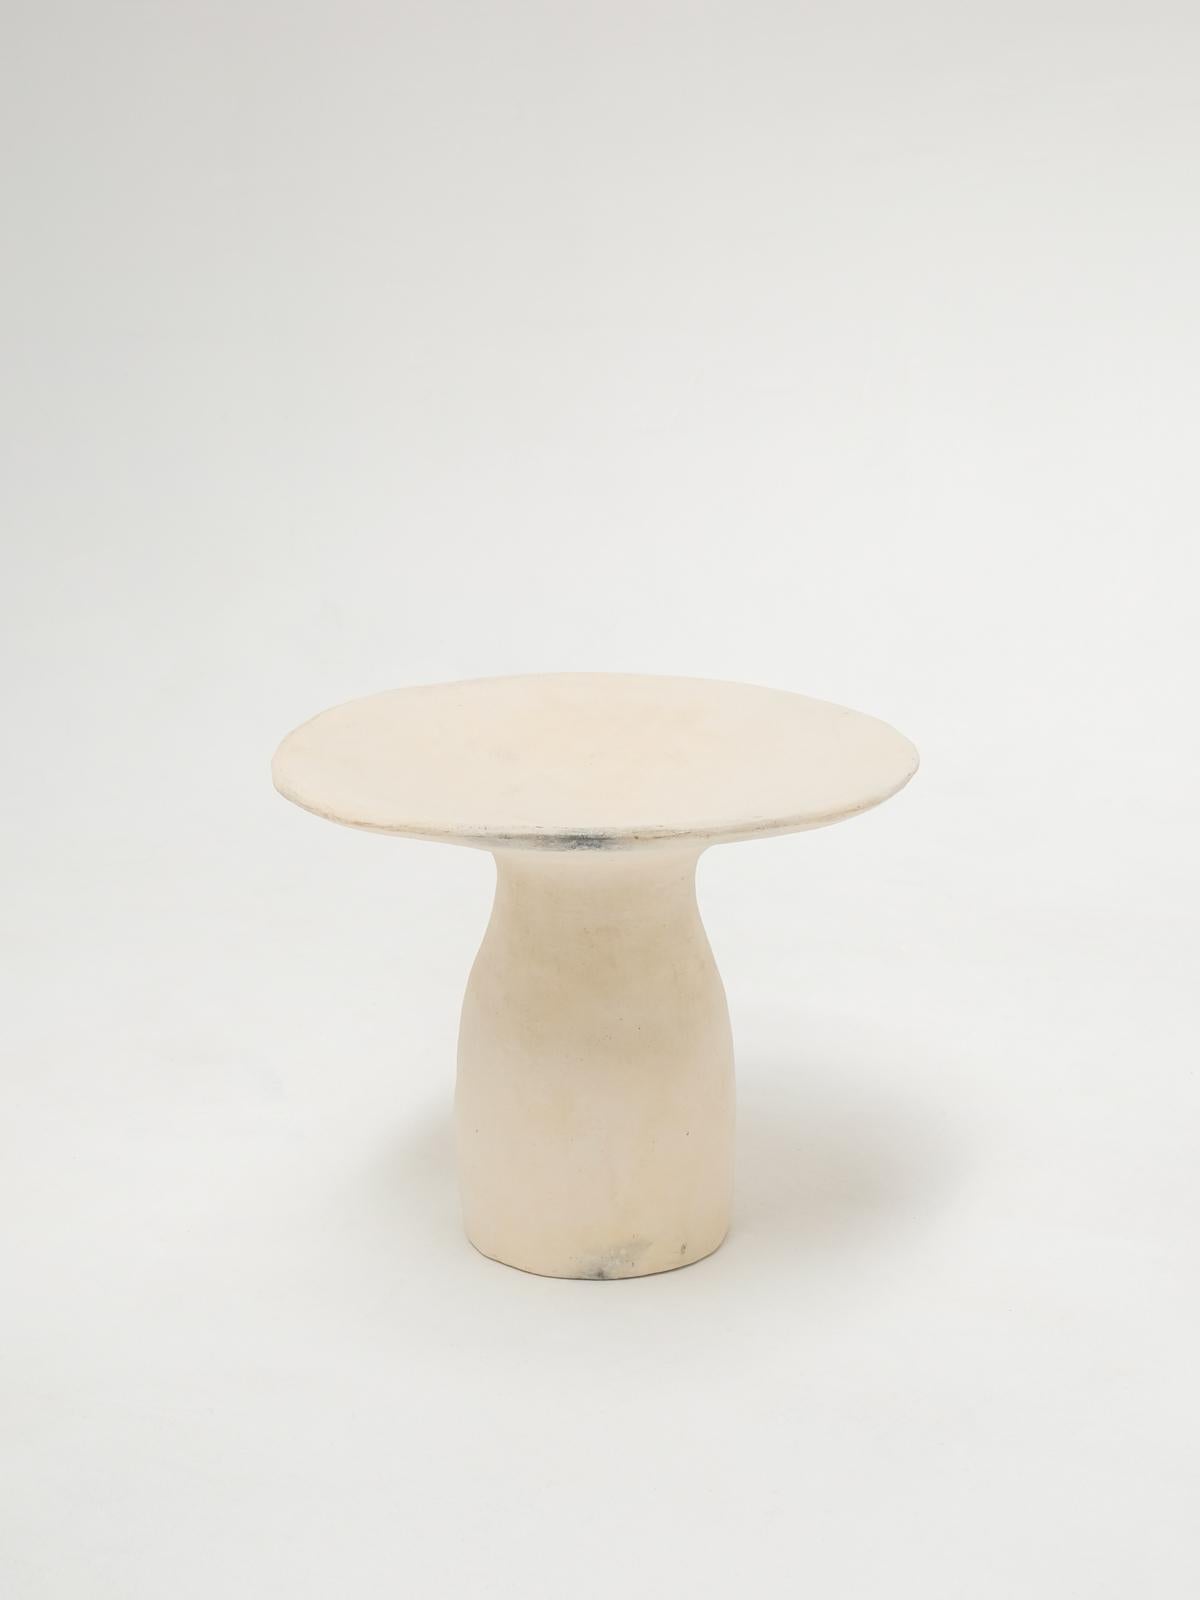 White Side Tables Made of local Clay, natural pigments, Handcrafted 8